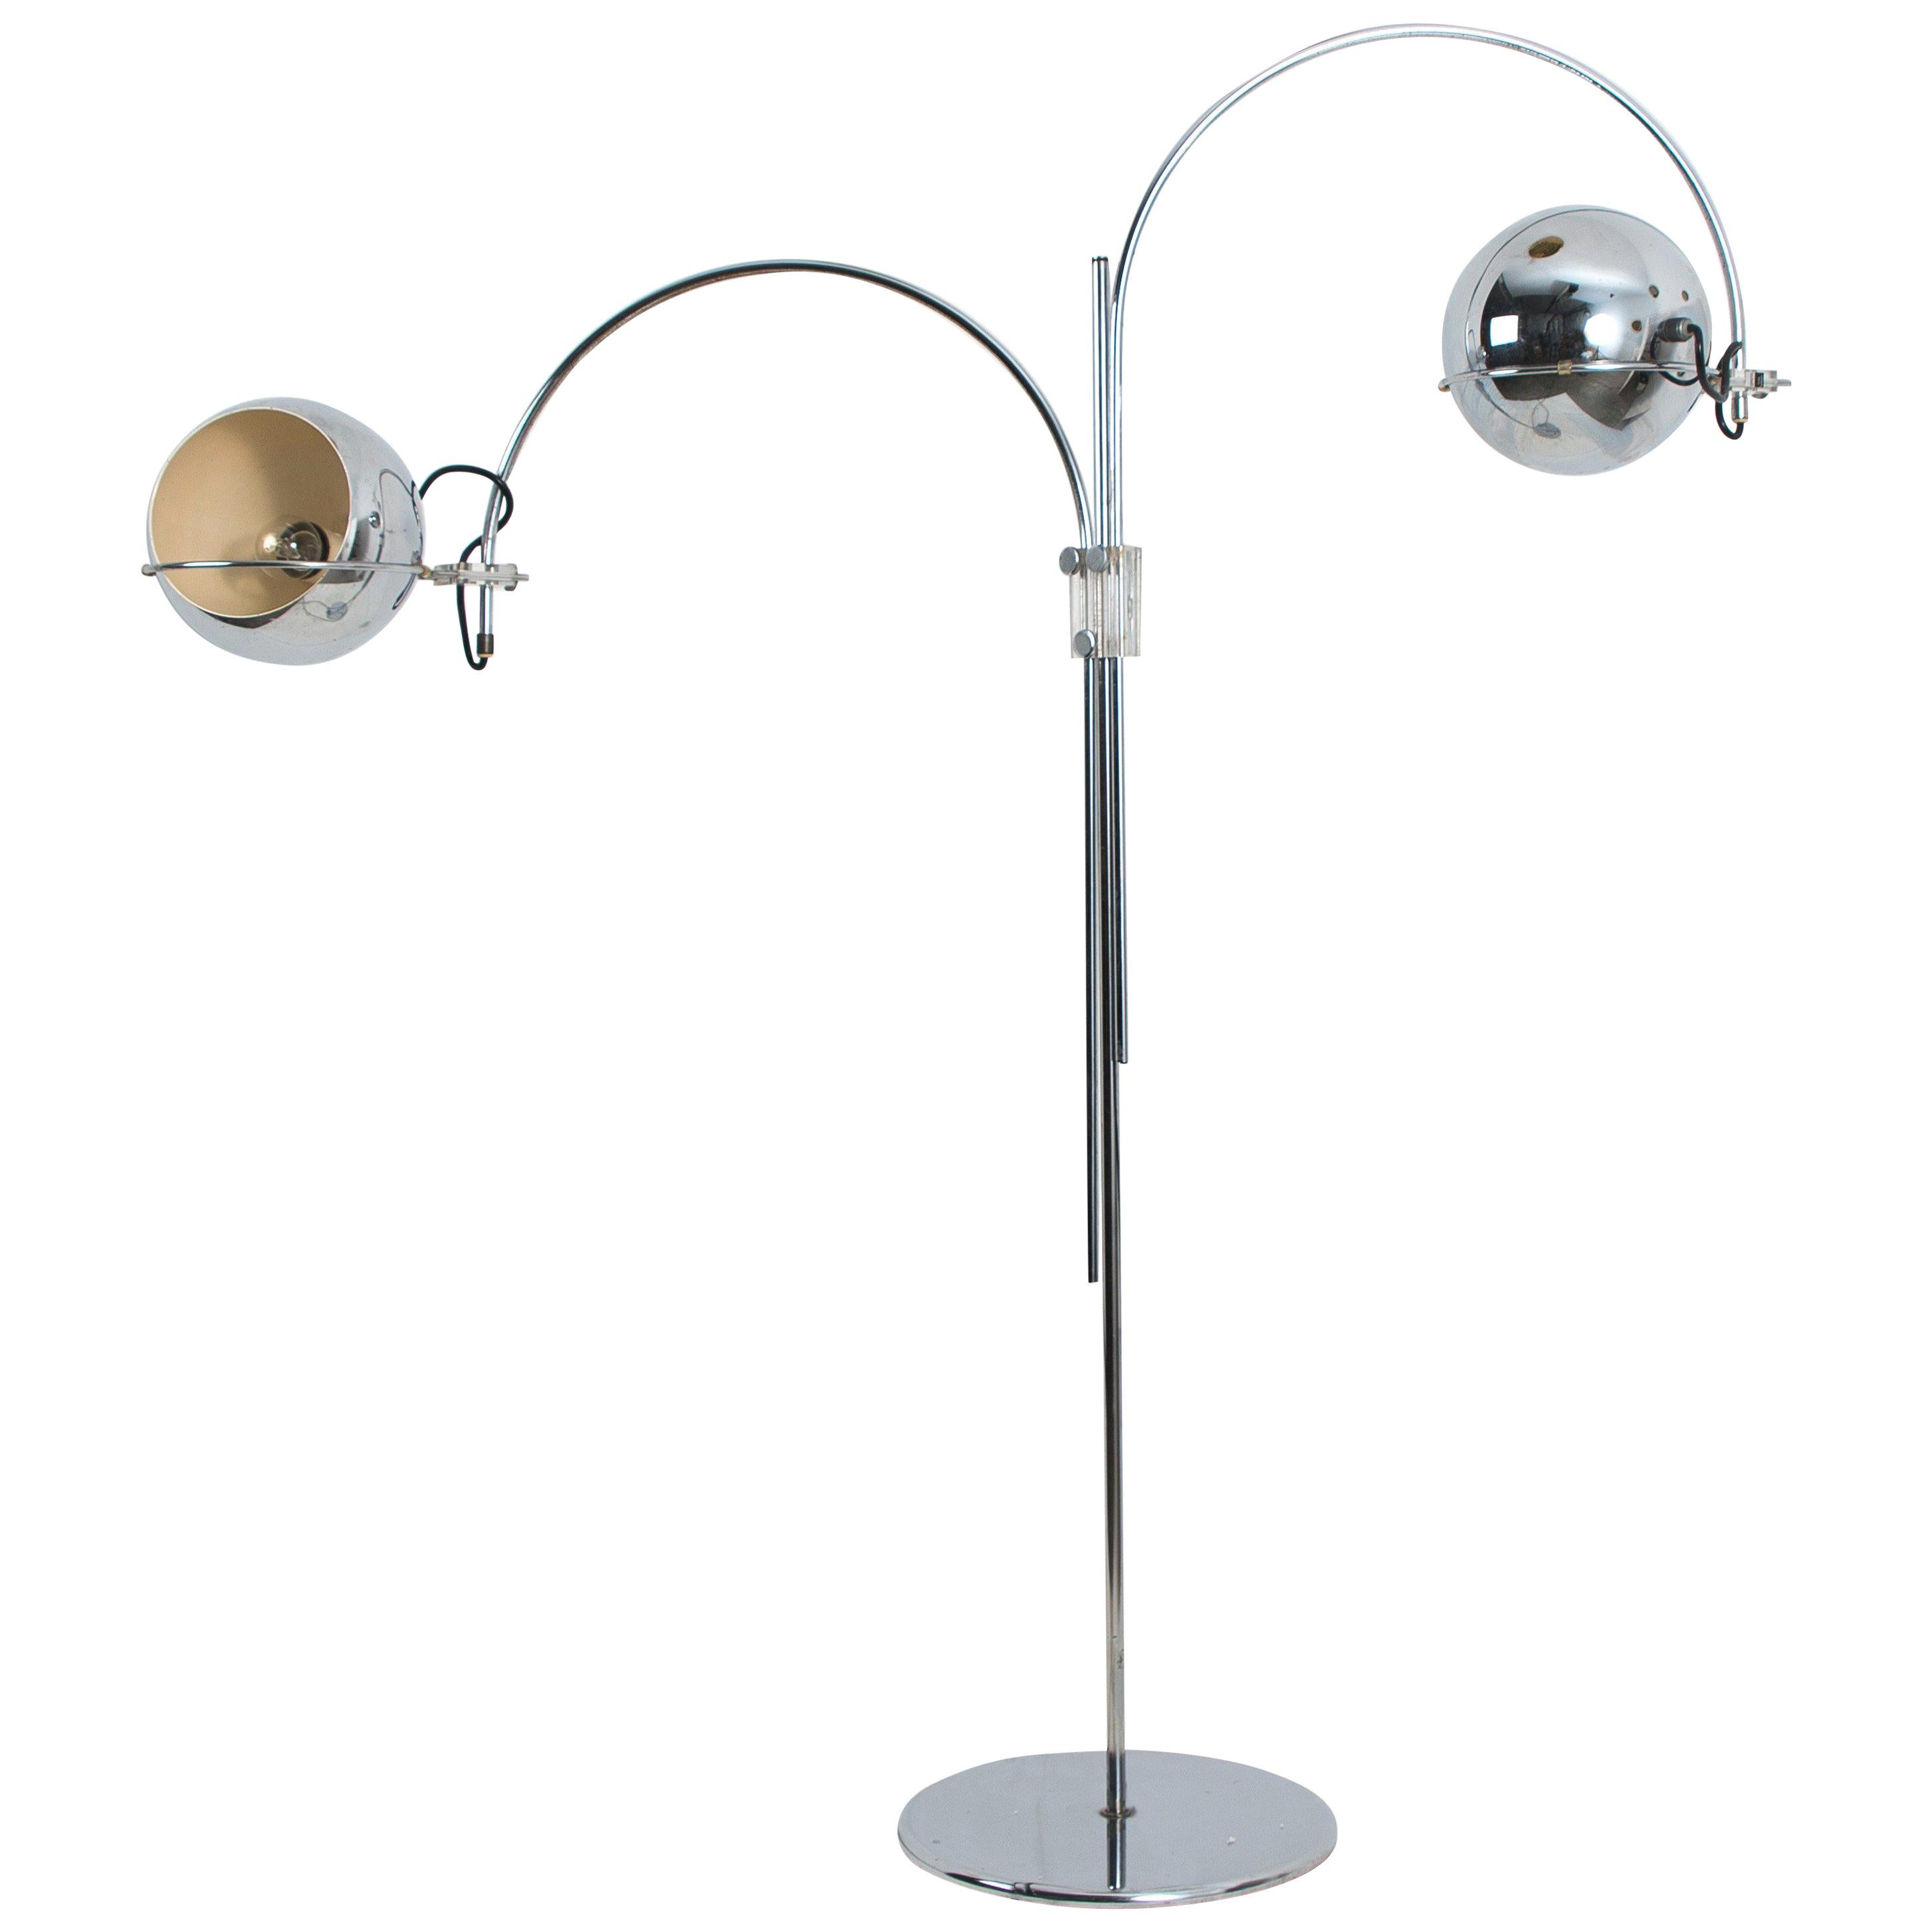 This floor lamp was produced by Gepo Netherlands, gebroeders Posthuma, Holland. The company designed a few number of beautiful lighting designs during the 1960s and 1970s, clearly influenced by Italian designers from the same era, such as Colombo,